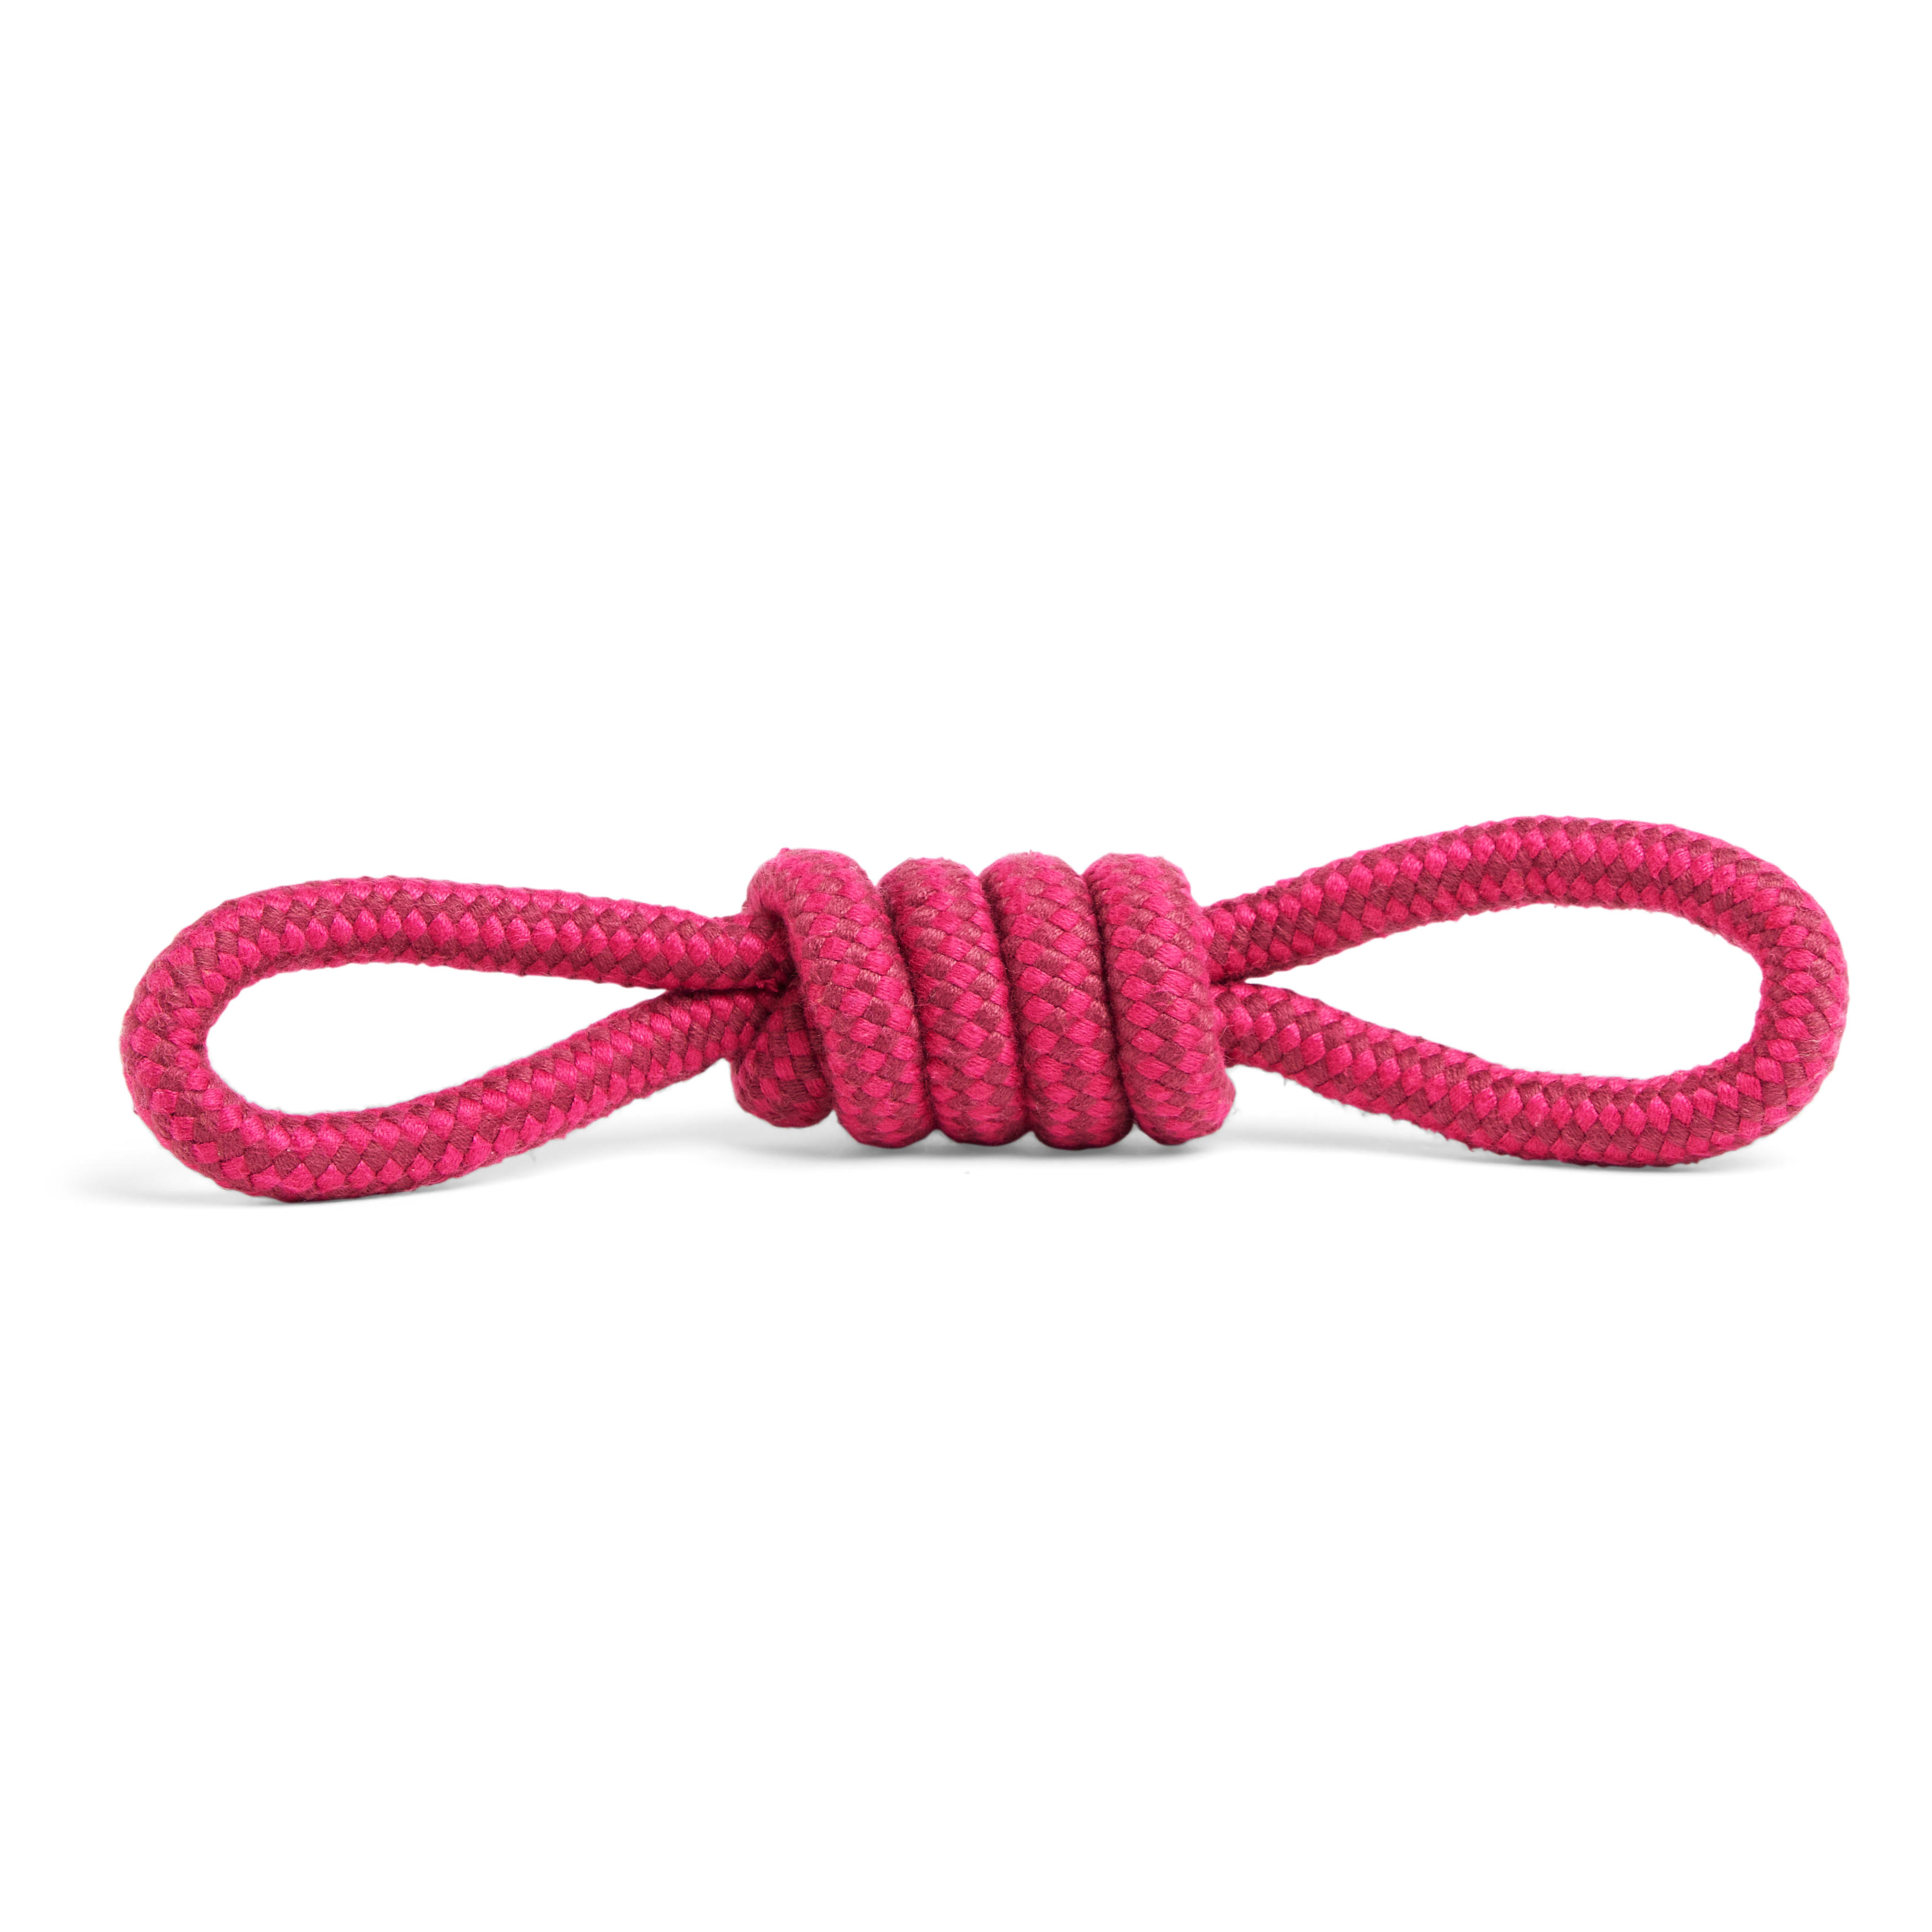 Leaps & Bounds Double Tug Rope Dog Toy, Small | Petco